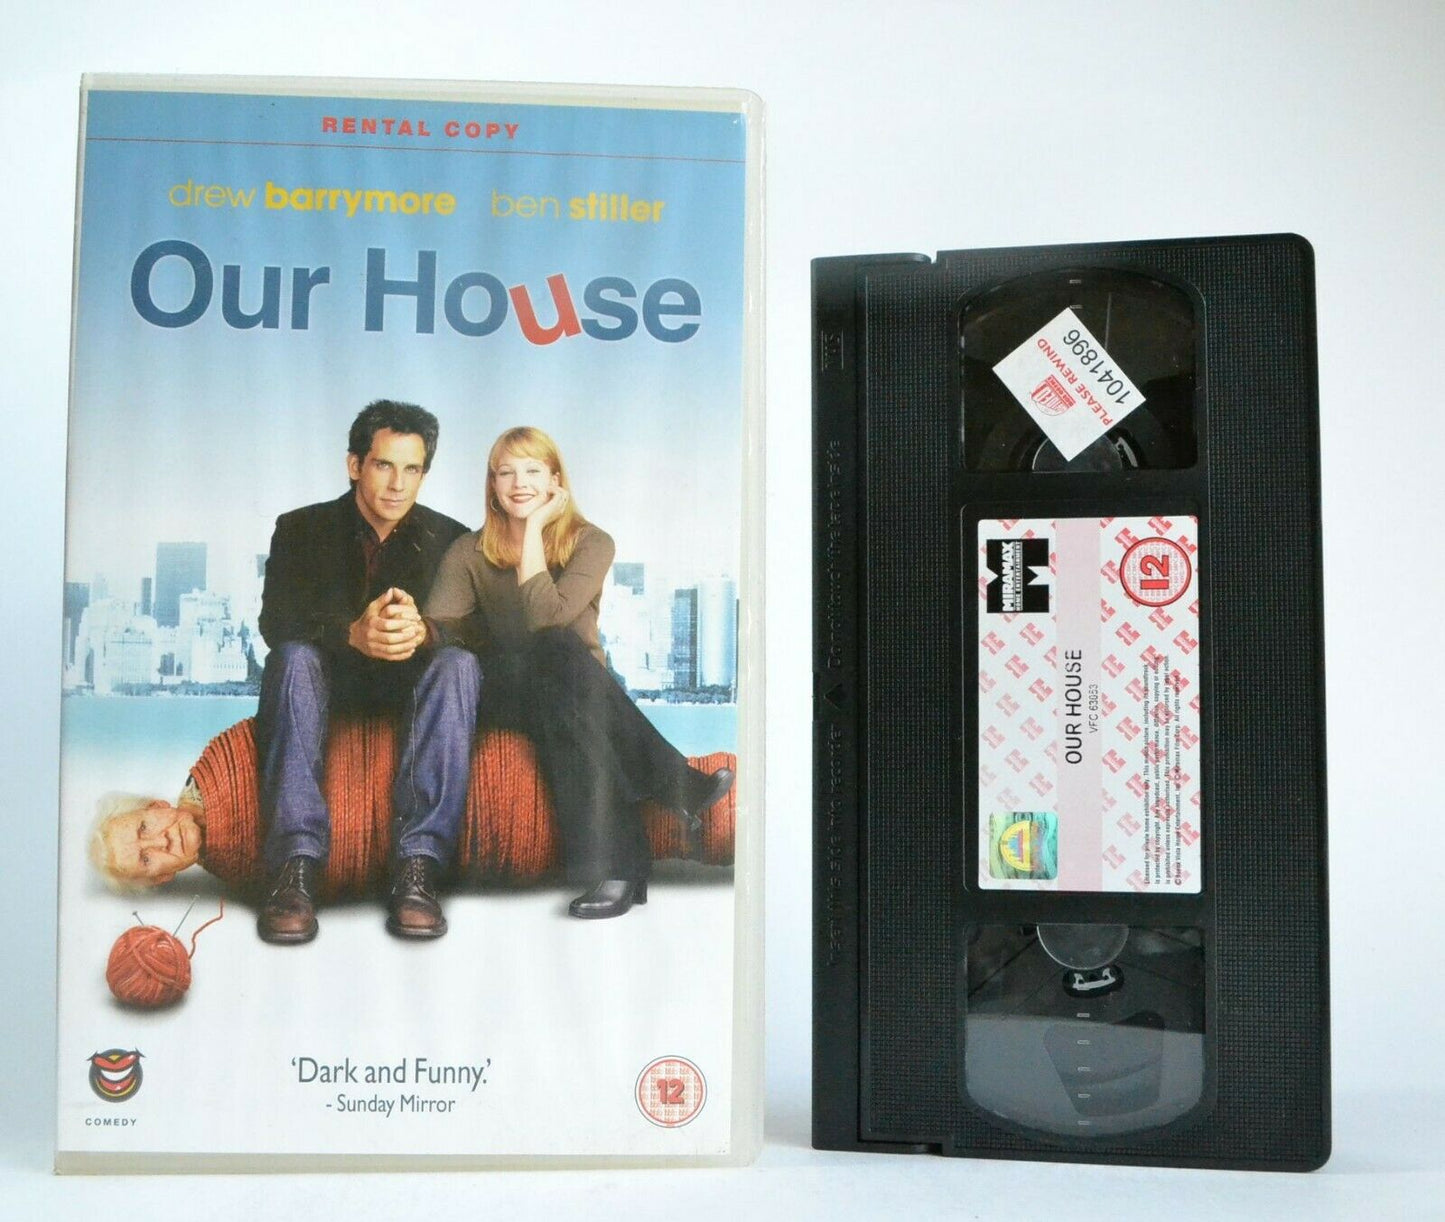 Our House (2003): Film By D.DeVito - Comedy - D.Barrymore/B.Stiller - Pal VHS-